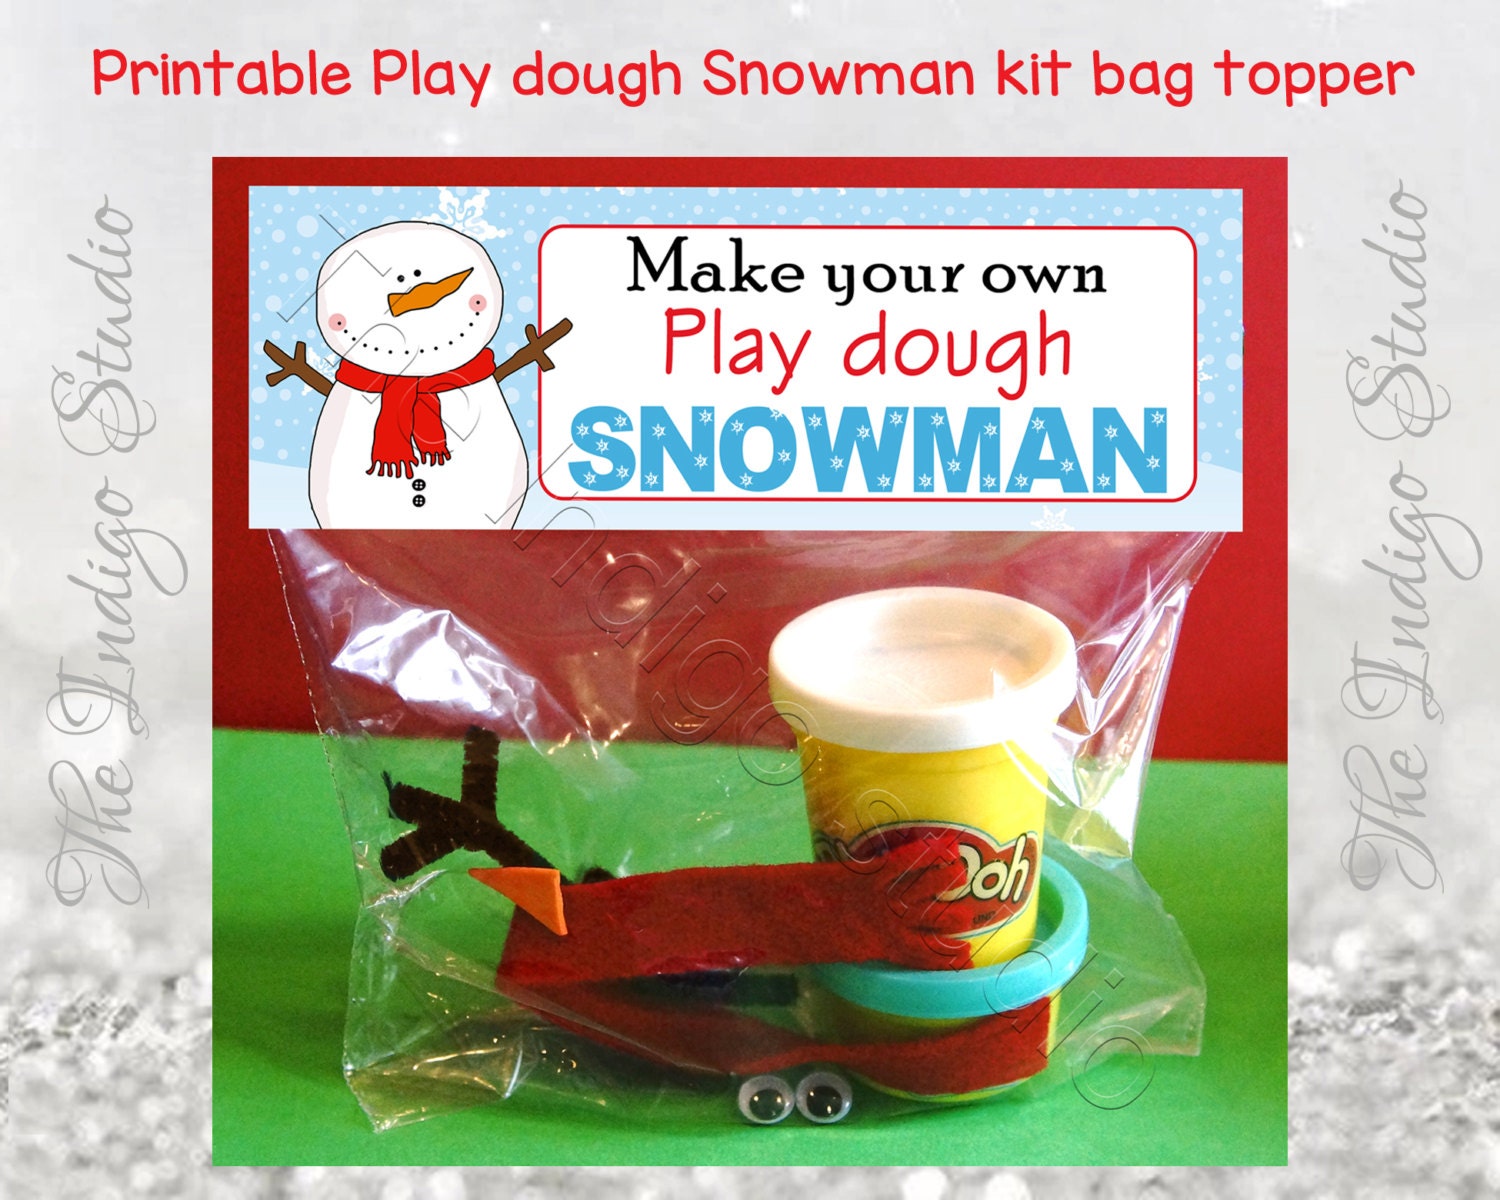 Do you want to build a snowman - bag topper for snowman making kit